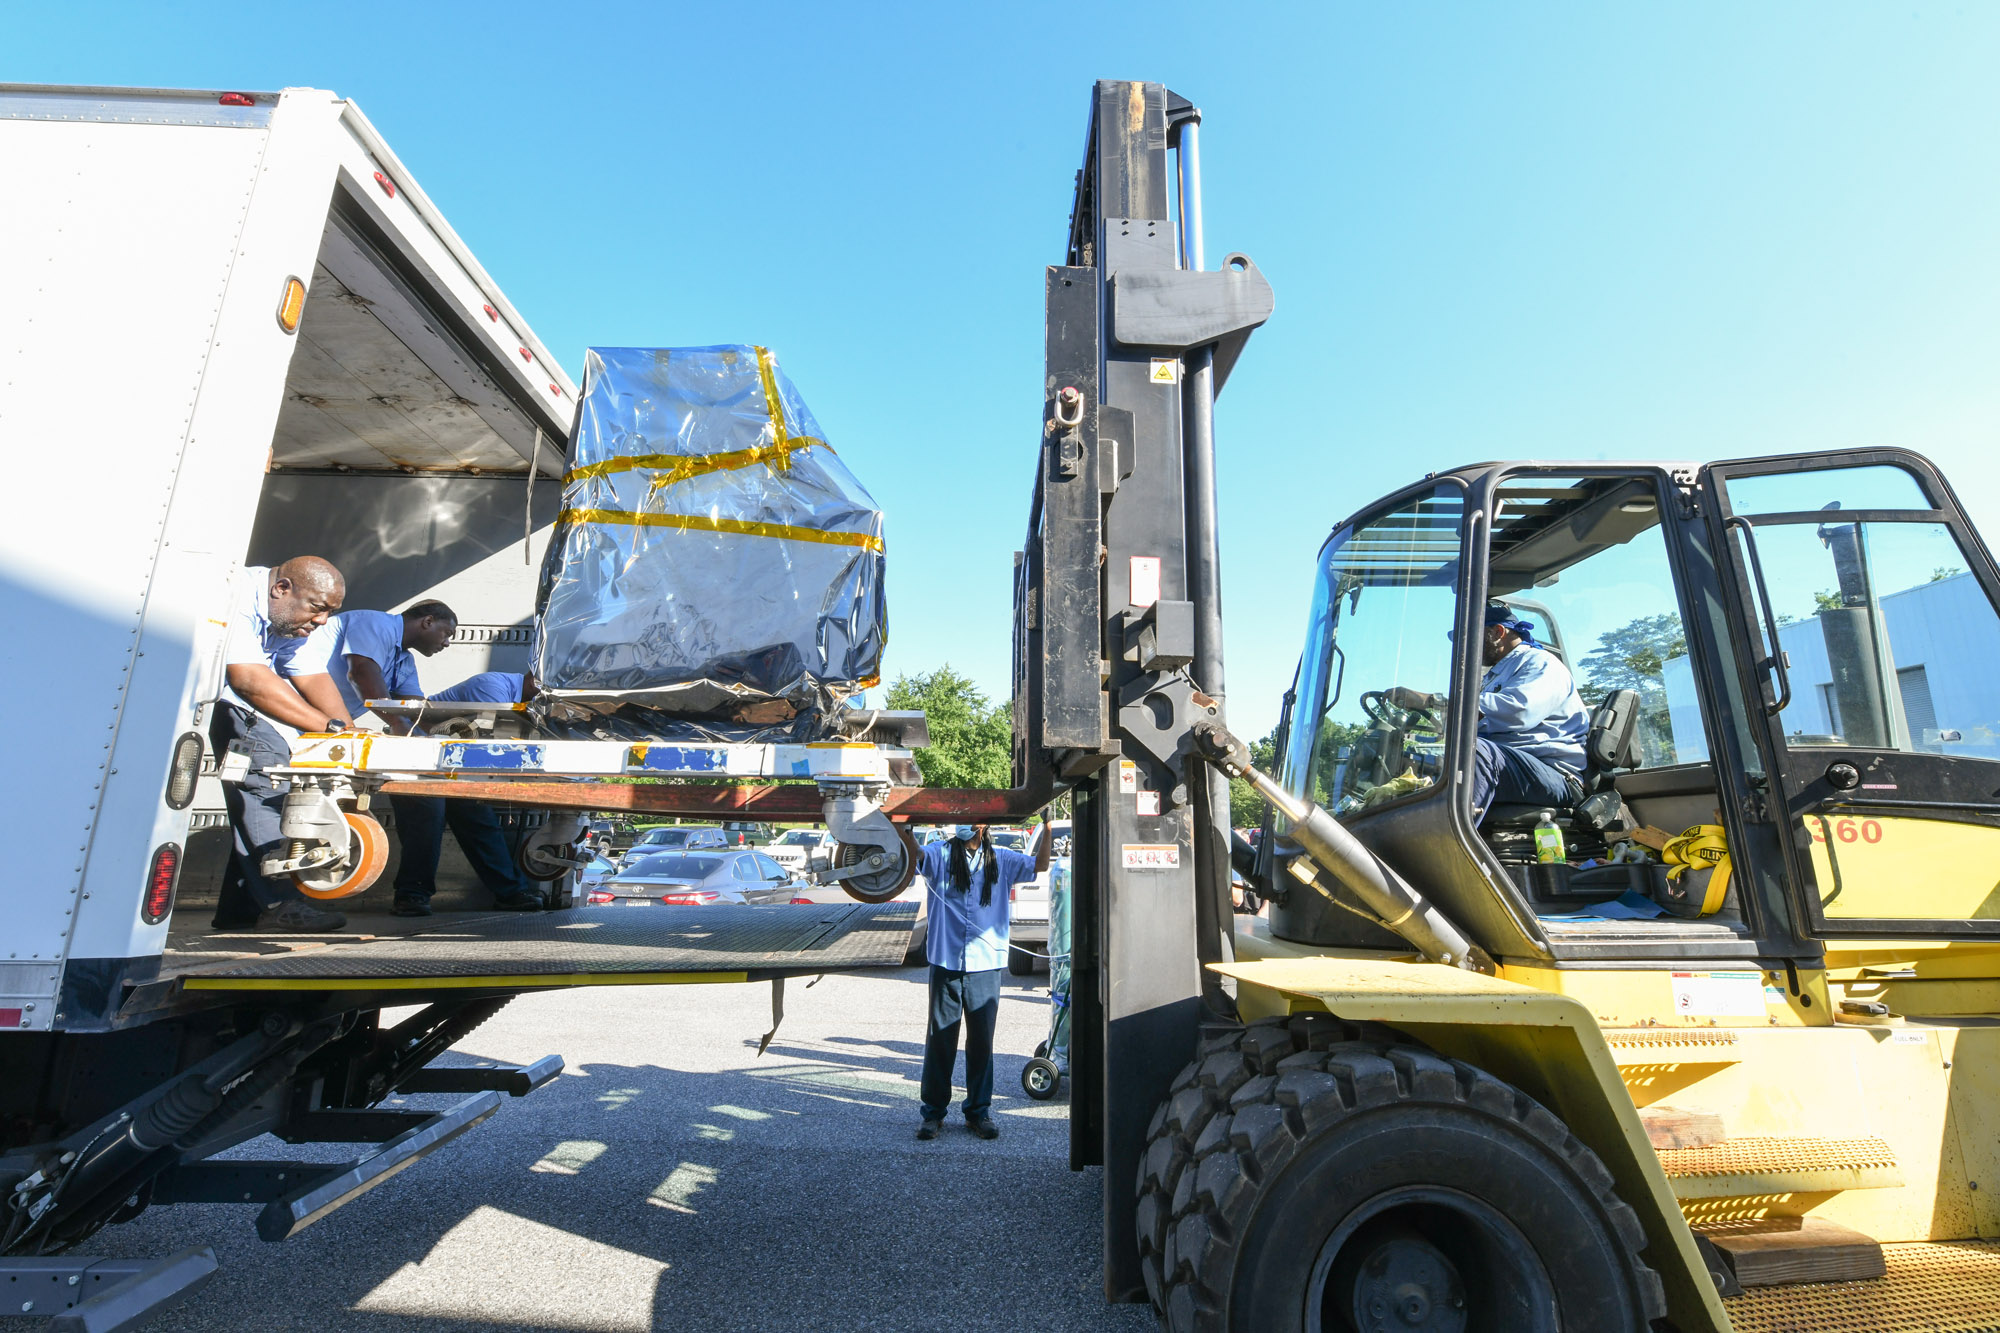 The GSFC Trax team lifts the Ocean Color Instrument on a forklift into a truck to transport to the integration and testing facility for envirnomental testing.